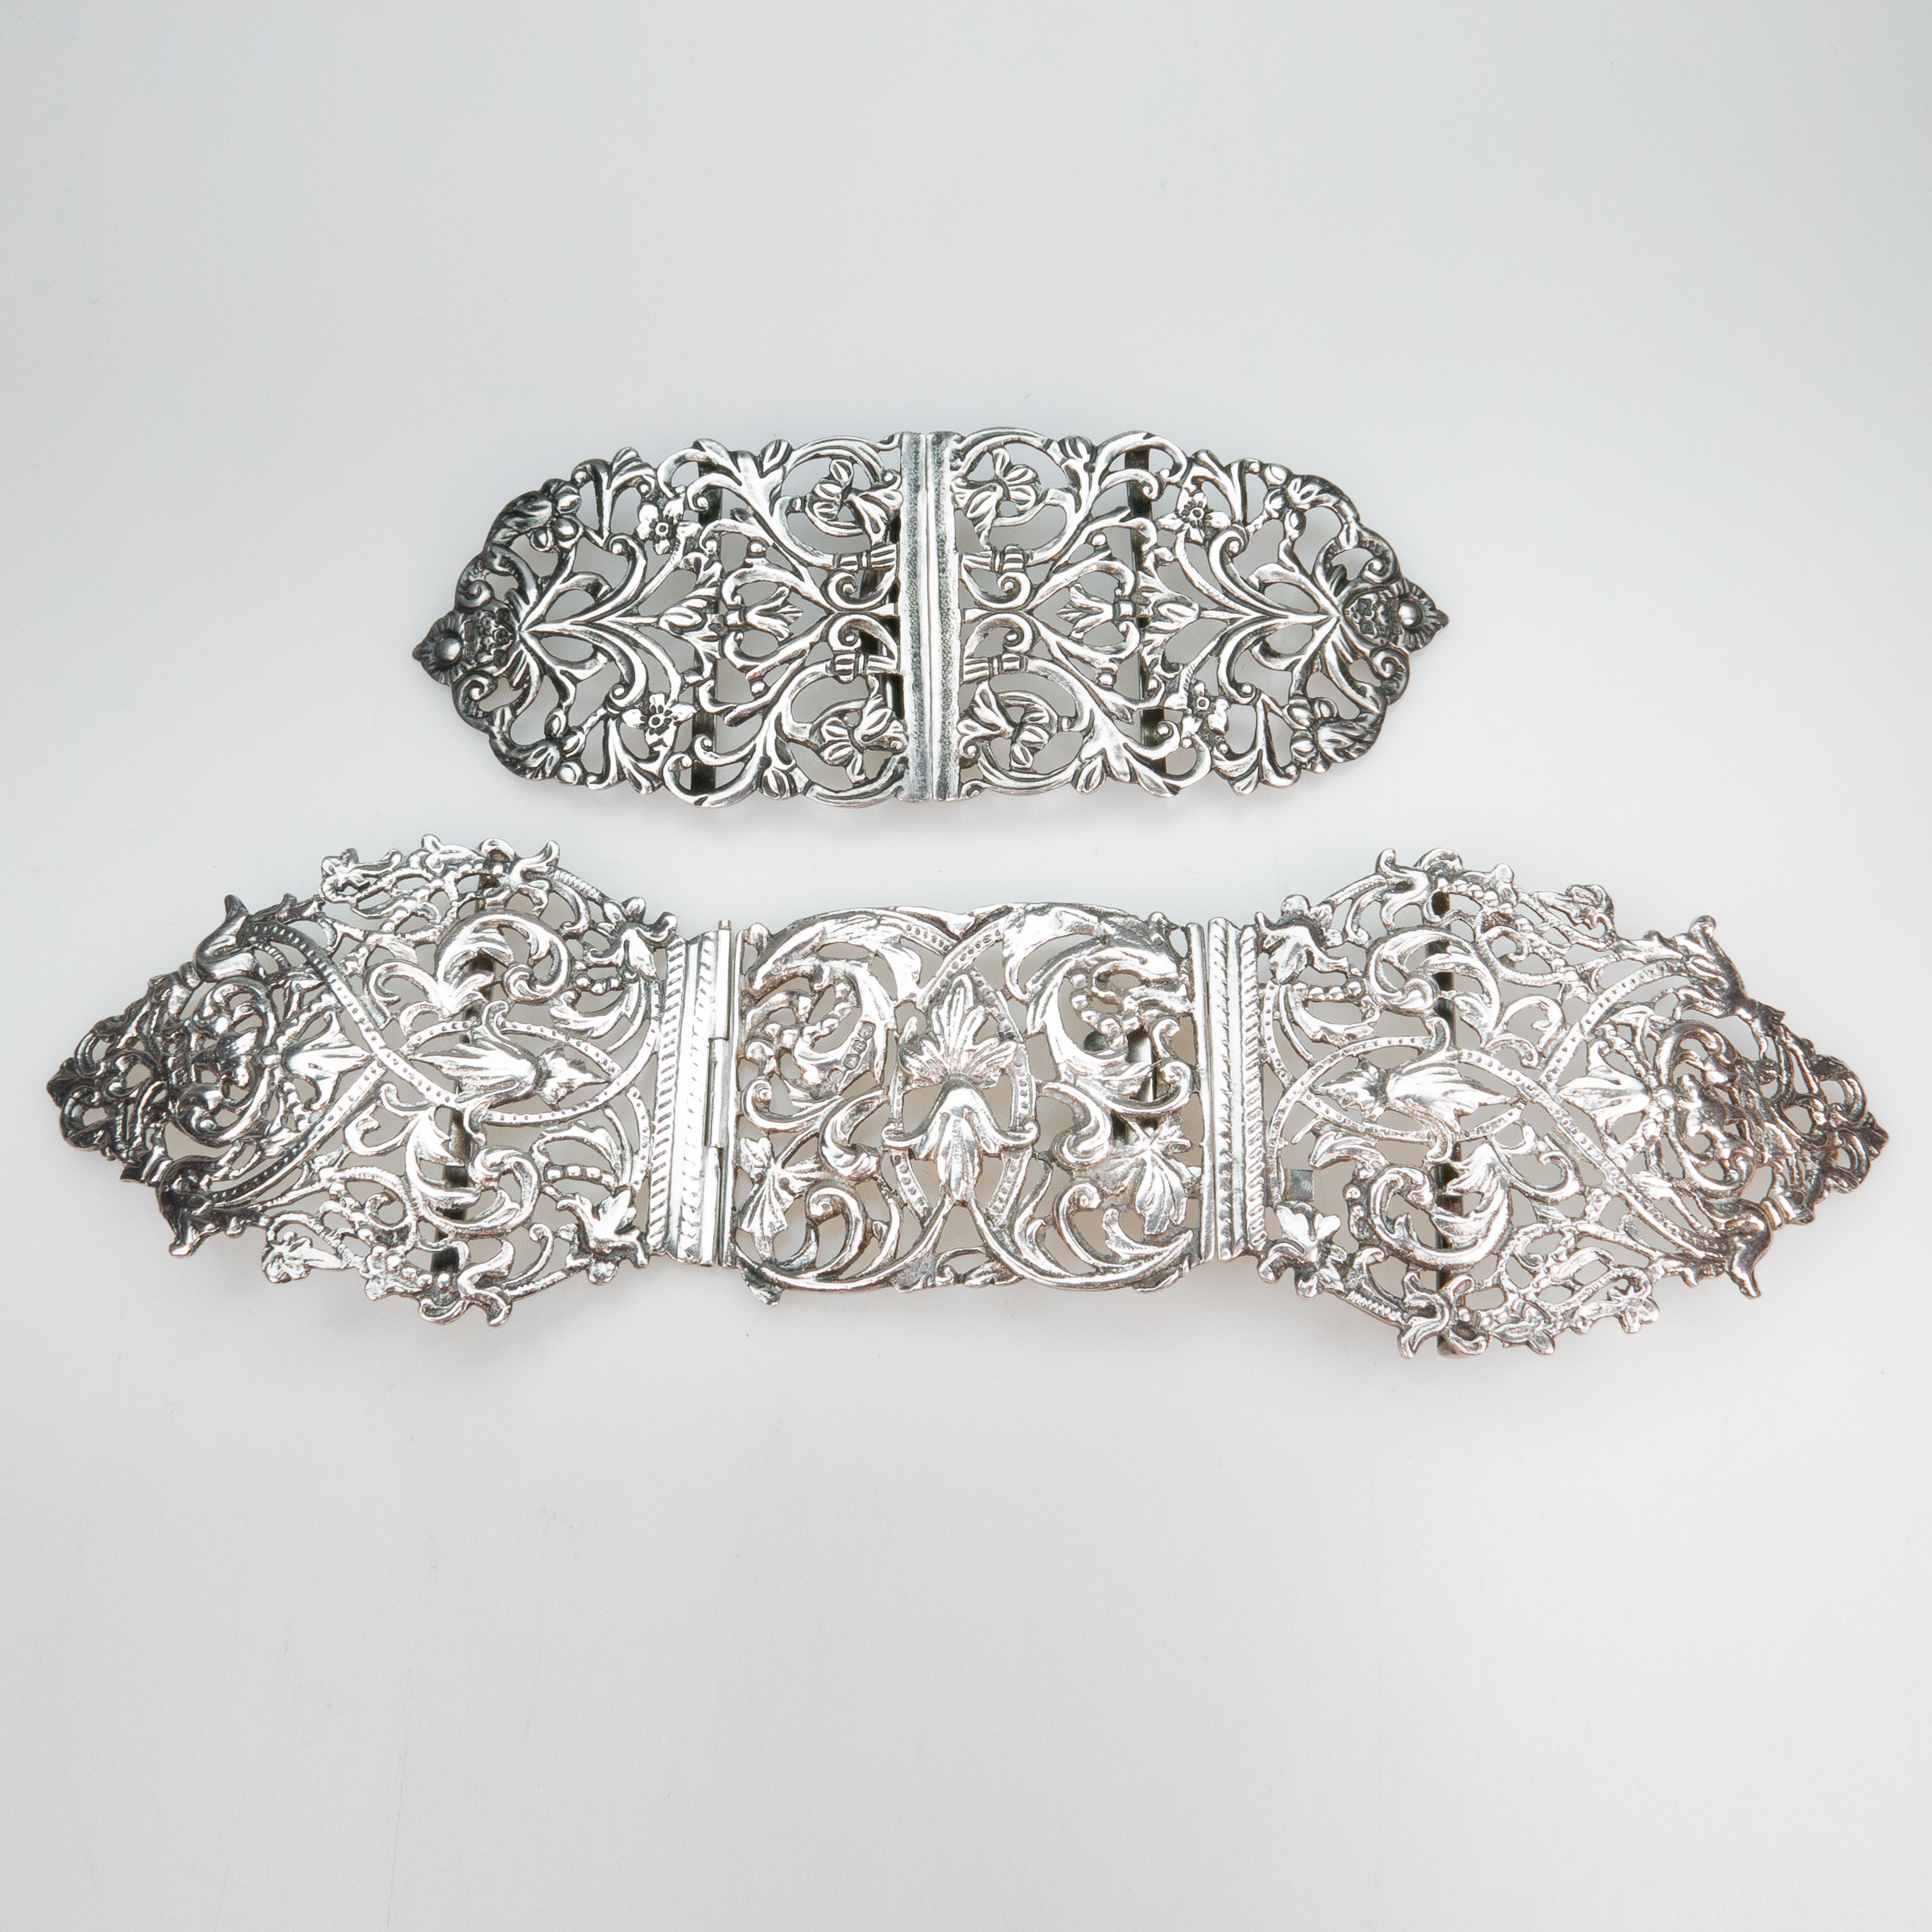 Two English Silver Belt Buckles